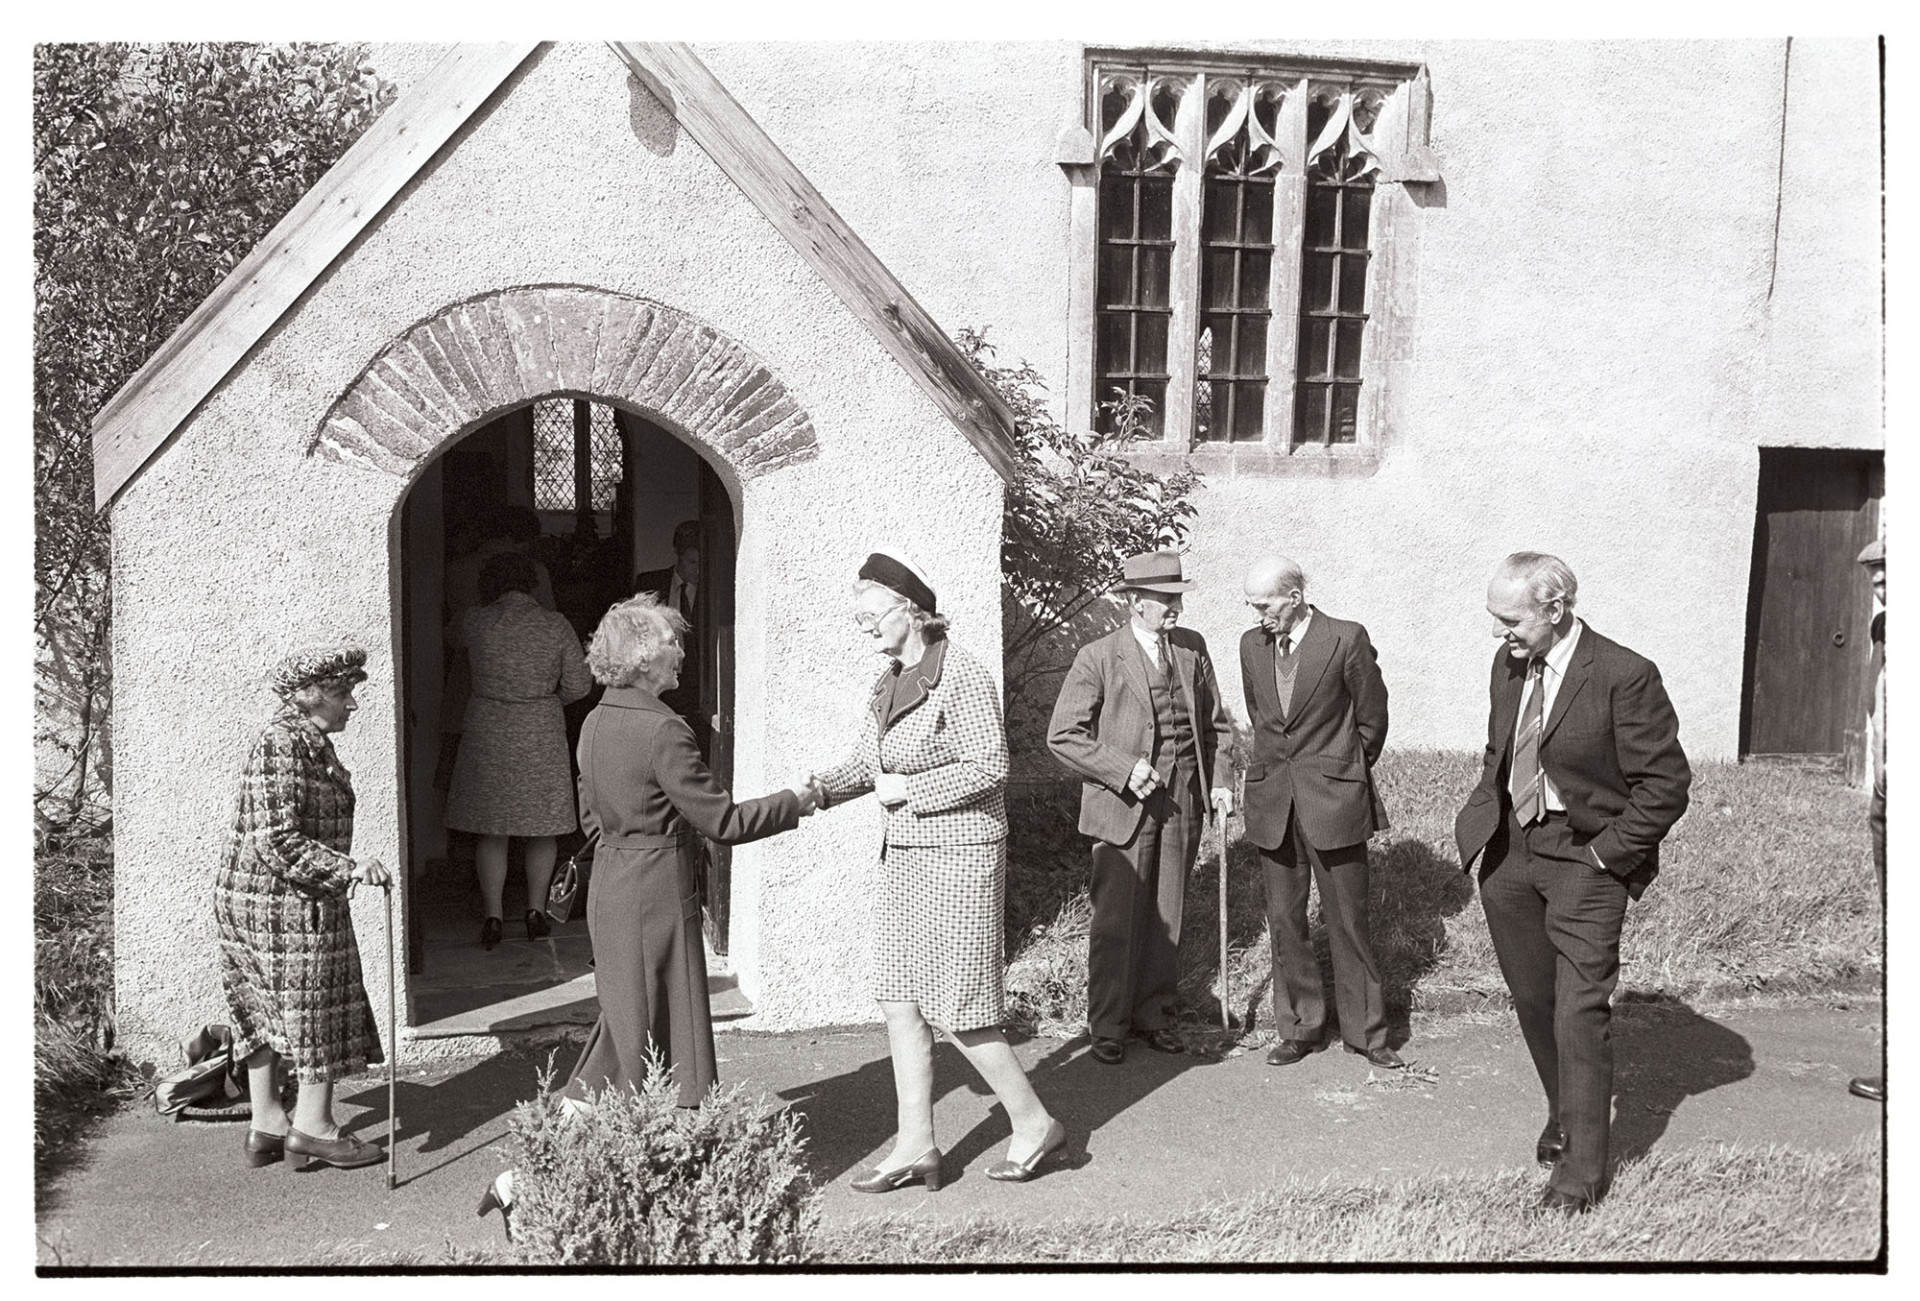 People going into church, clothes, Sunday best dresses and suits, church porch and window.
[A group of men and women outside the porch of Dowland Church, about to attend the Harvest Festival service.  Two women are shaking hands.]